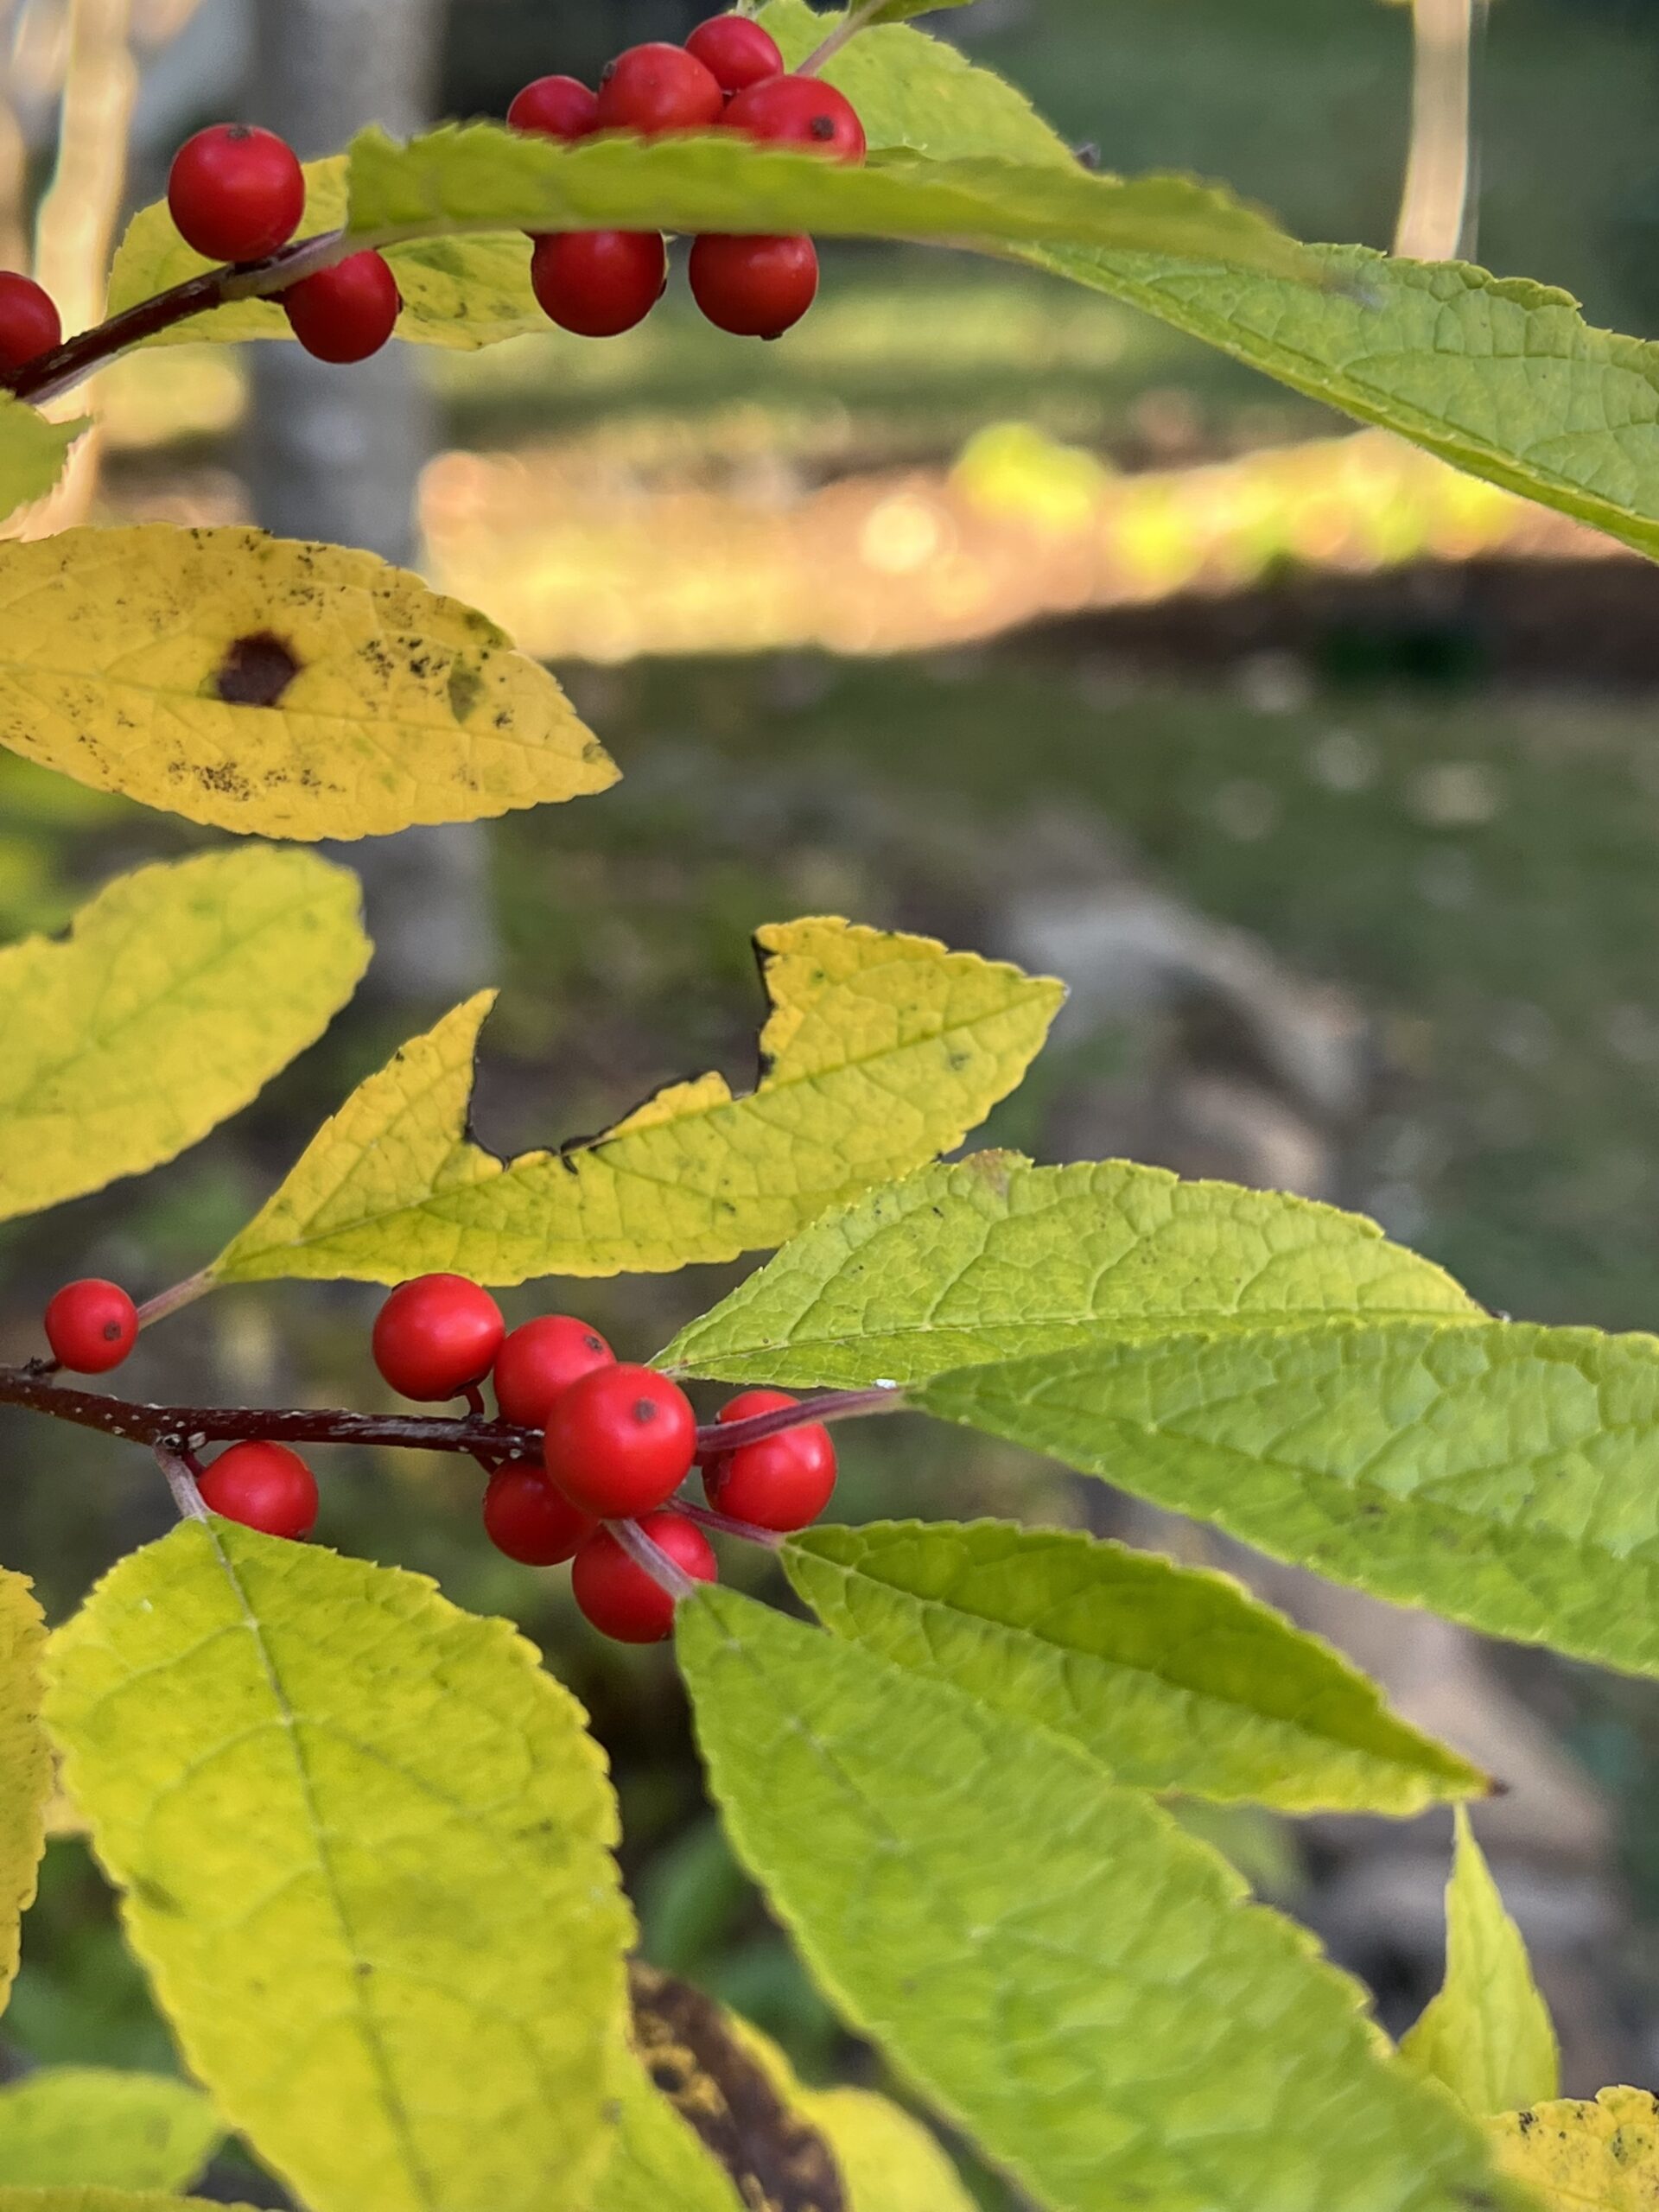 Red clusters of berries show between yellow leaves during fall